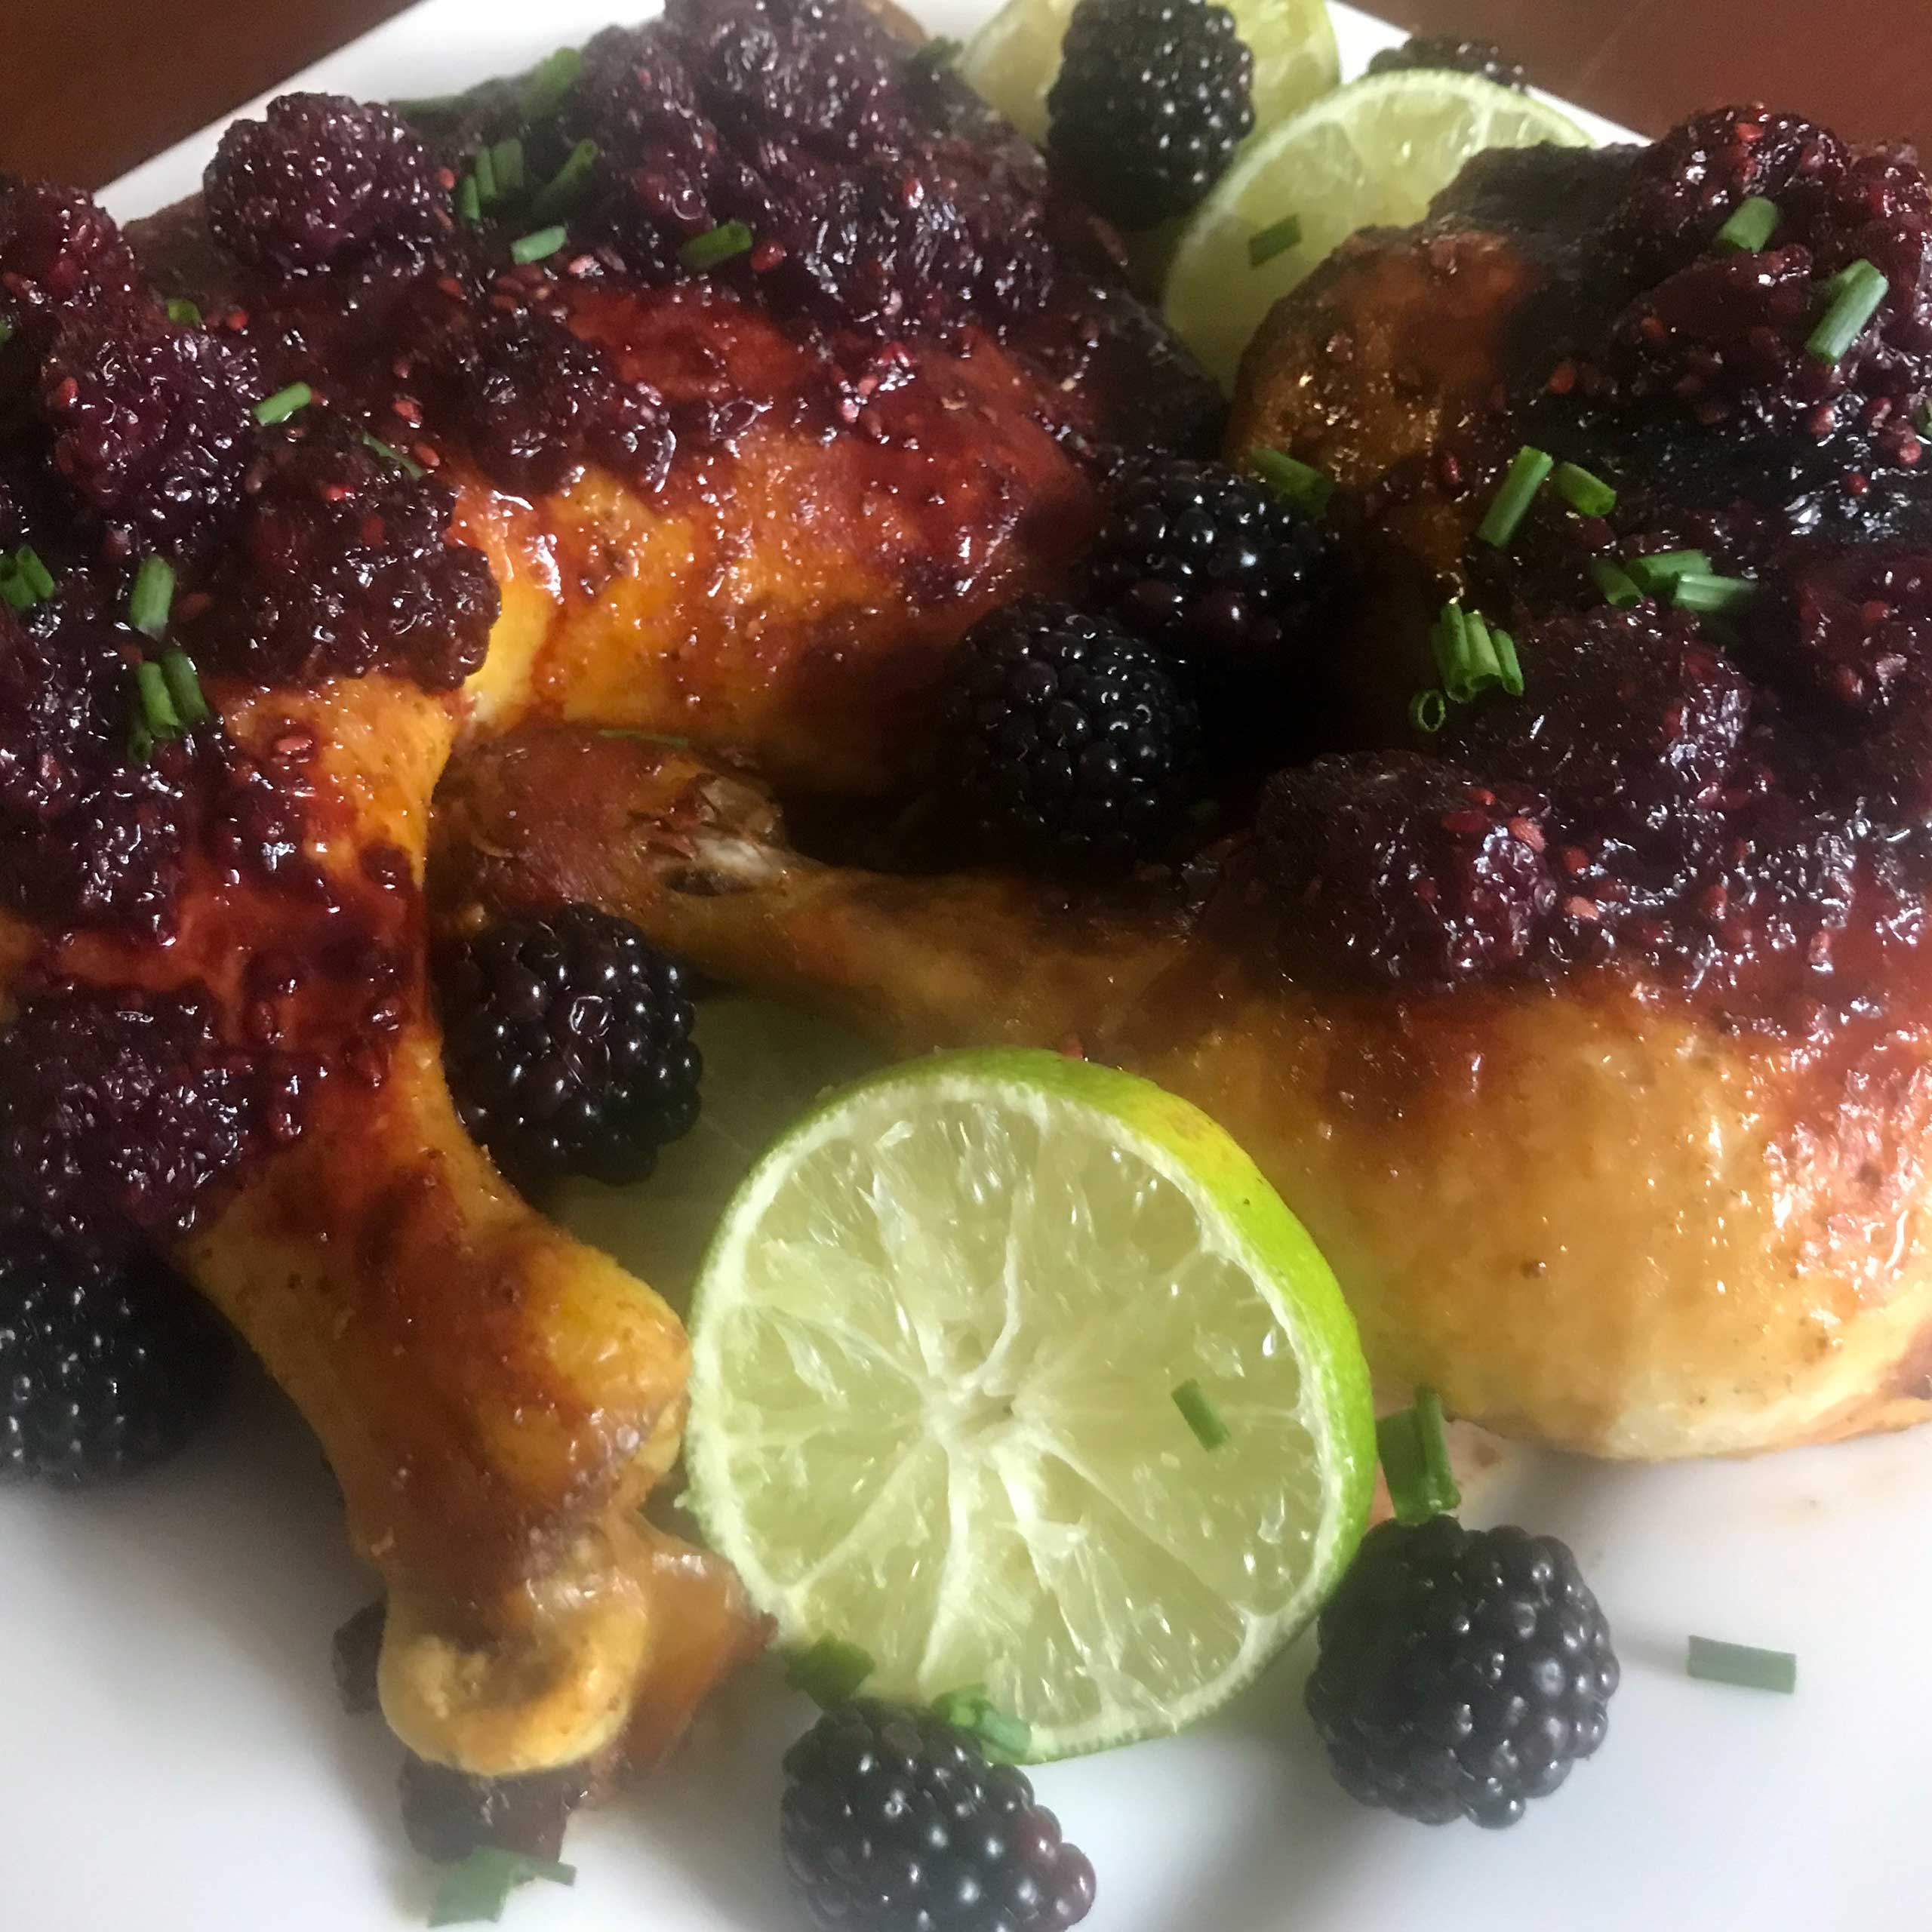 Blackberry-Glazed-Chicken-Legs-with-Ginger-and-Lime-8